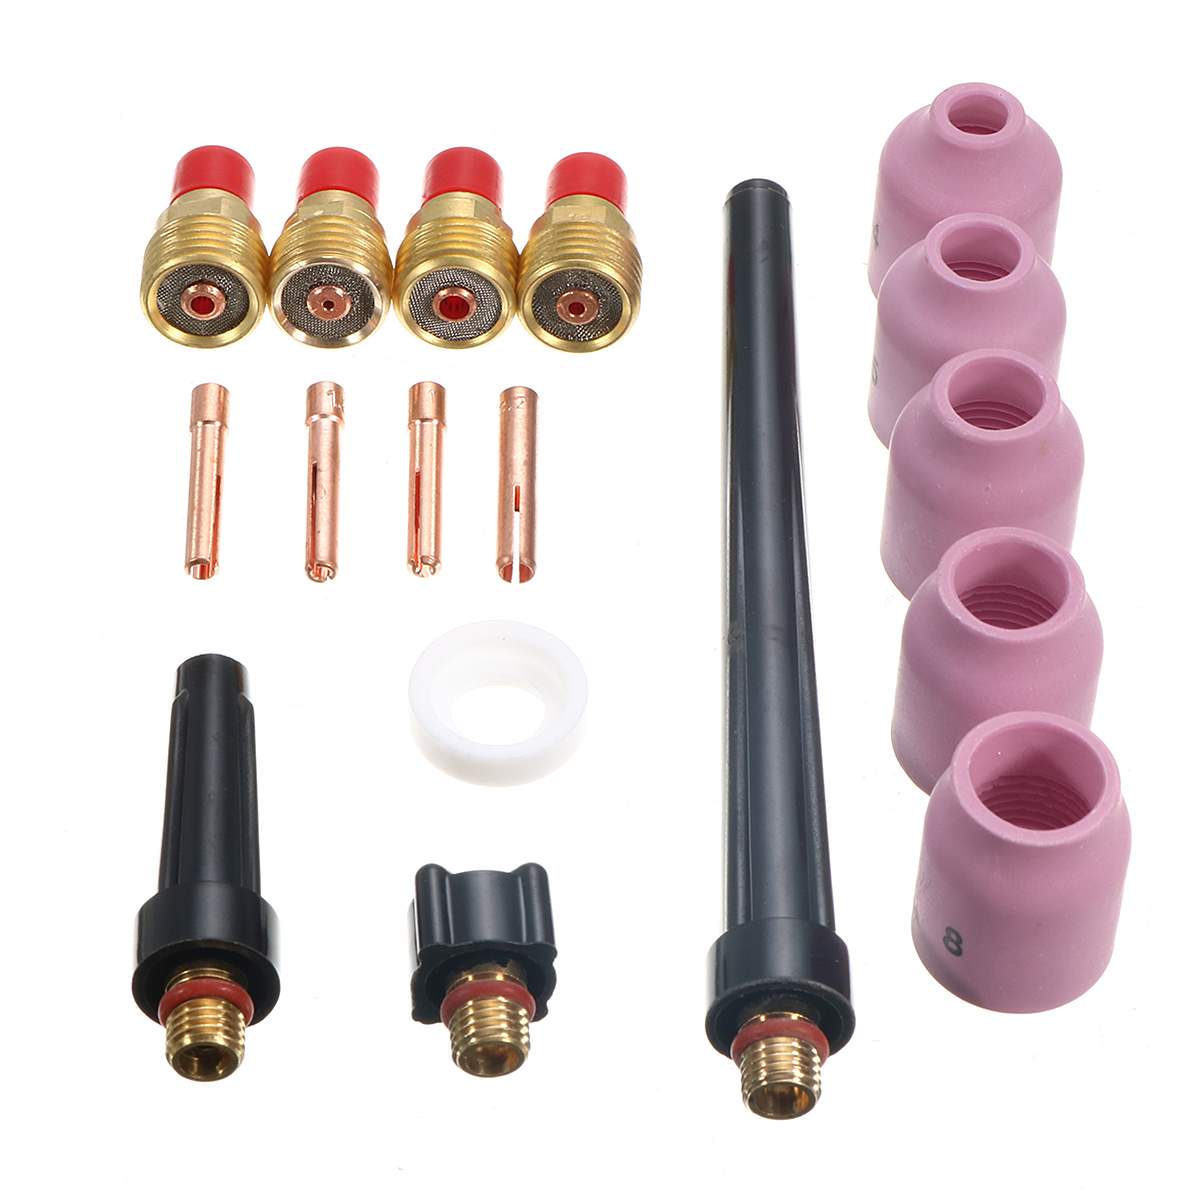 Hot Sale 17 pcs TIG Welding Torch Gas Lens Accessory Full Kit Set for WP9/20/25 Series 0.040"-1/8" Welders Tool Wholesale